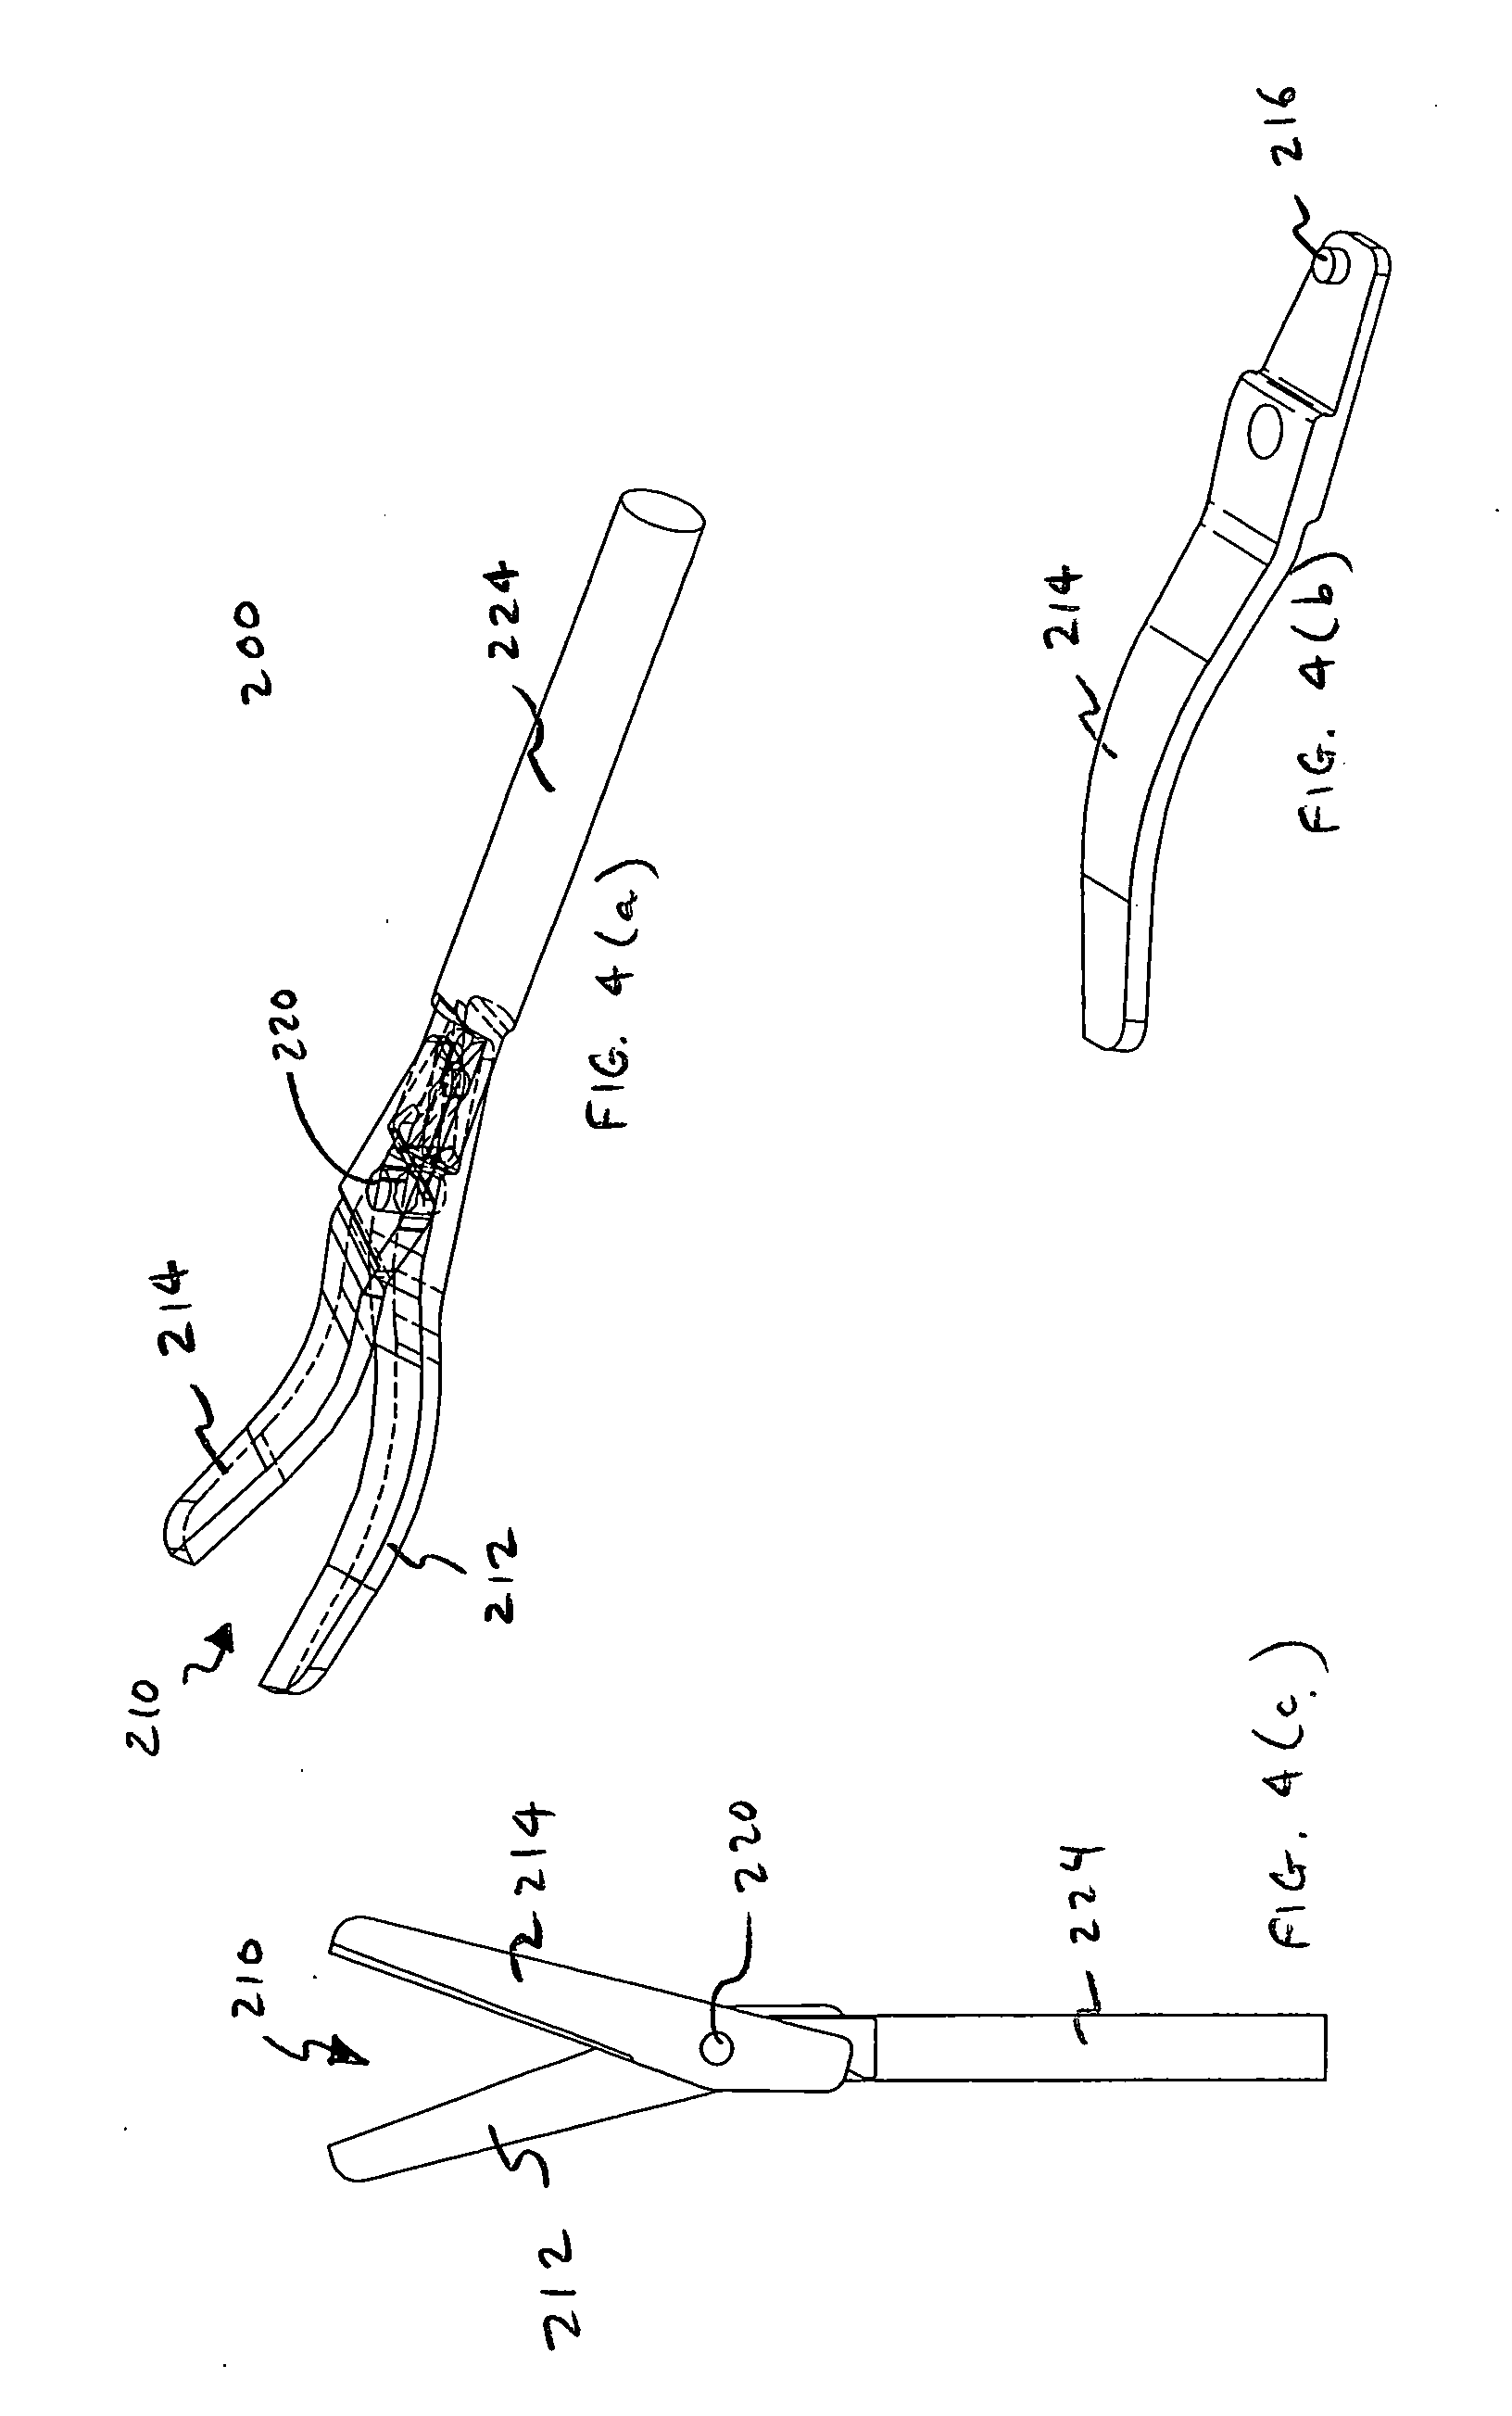 System and method for actuating a laparoscopic surgical instrument